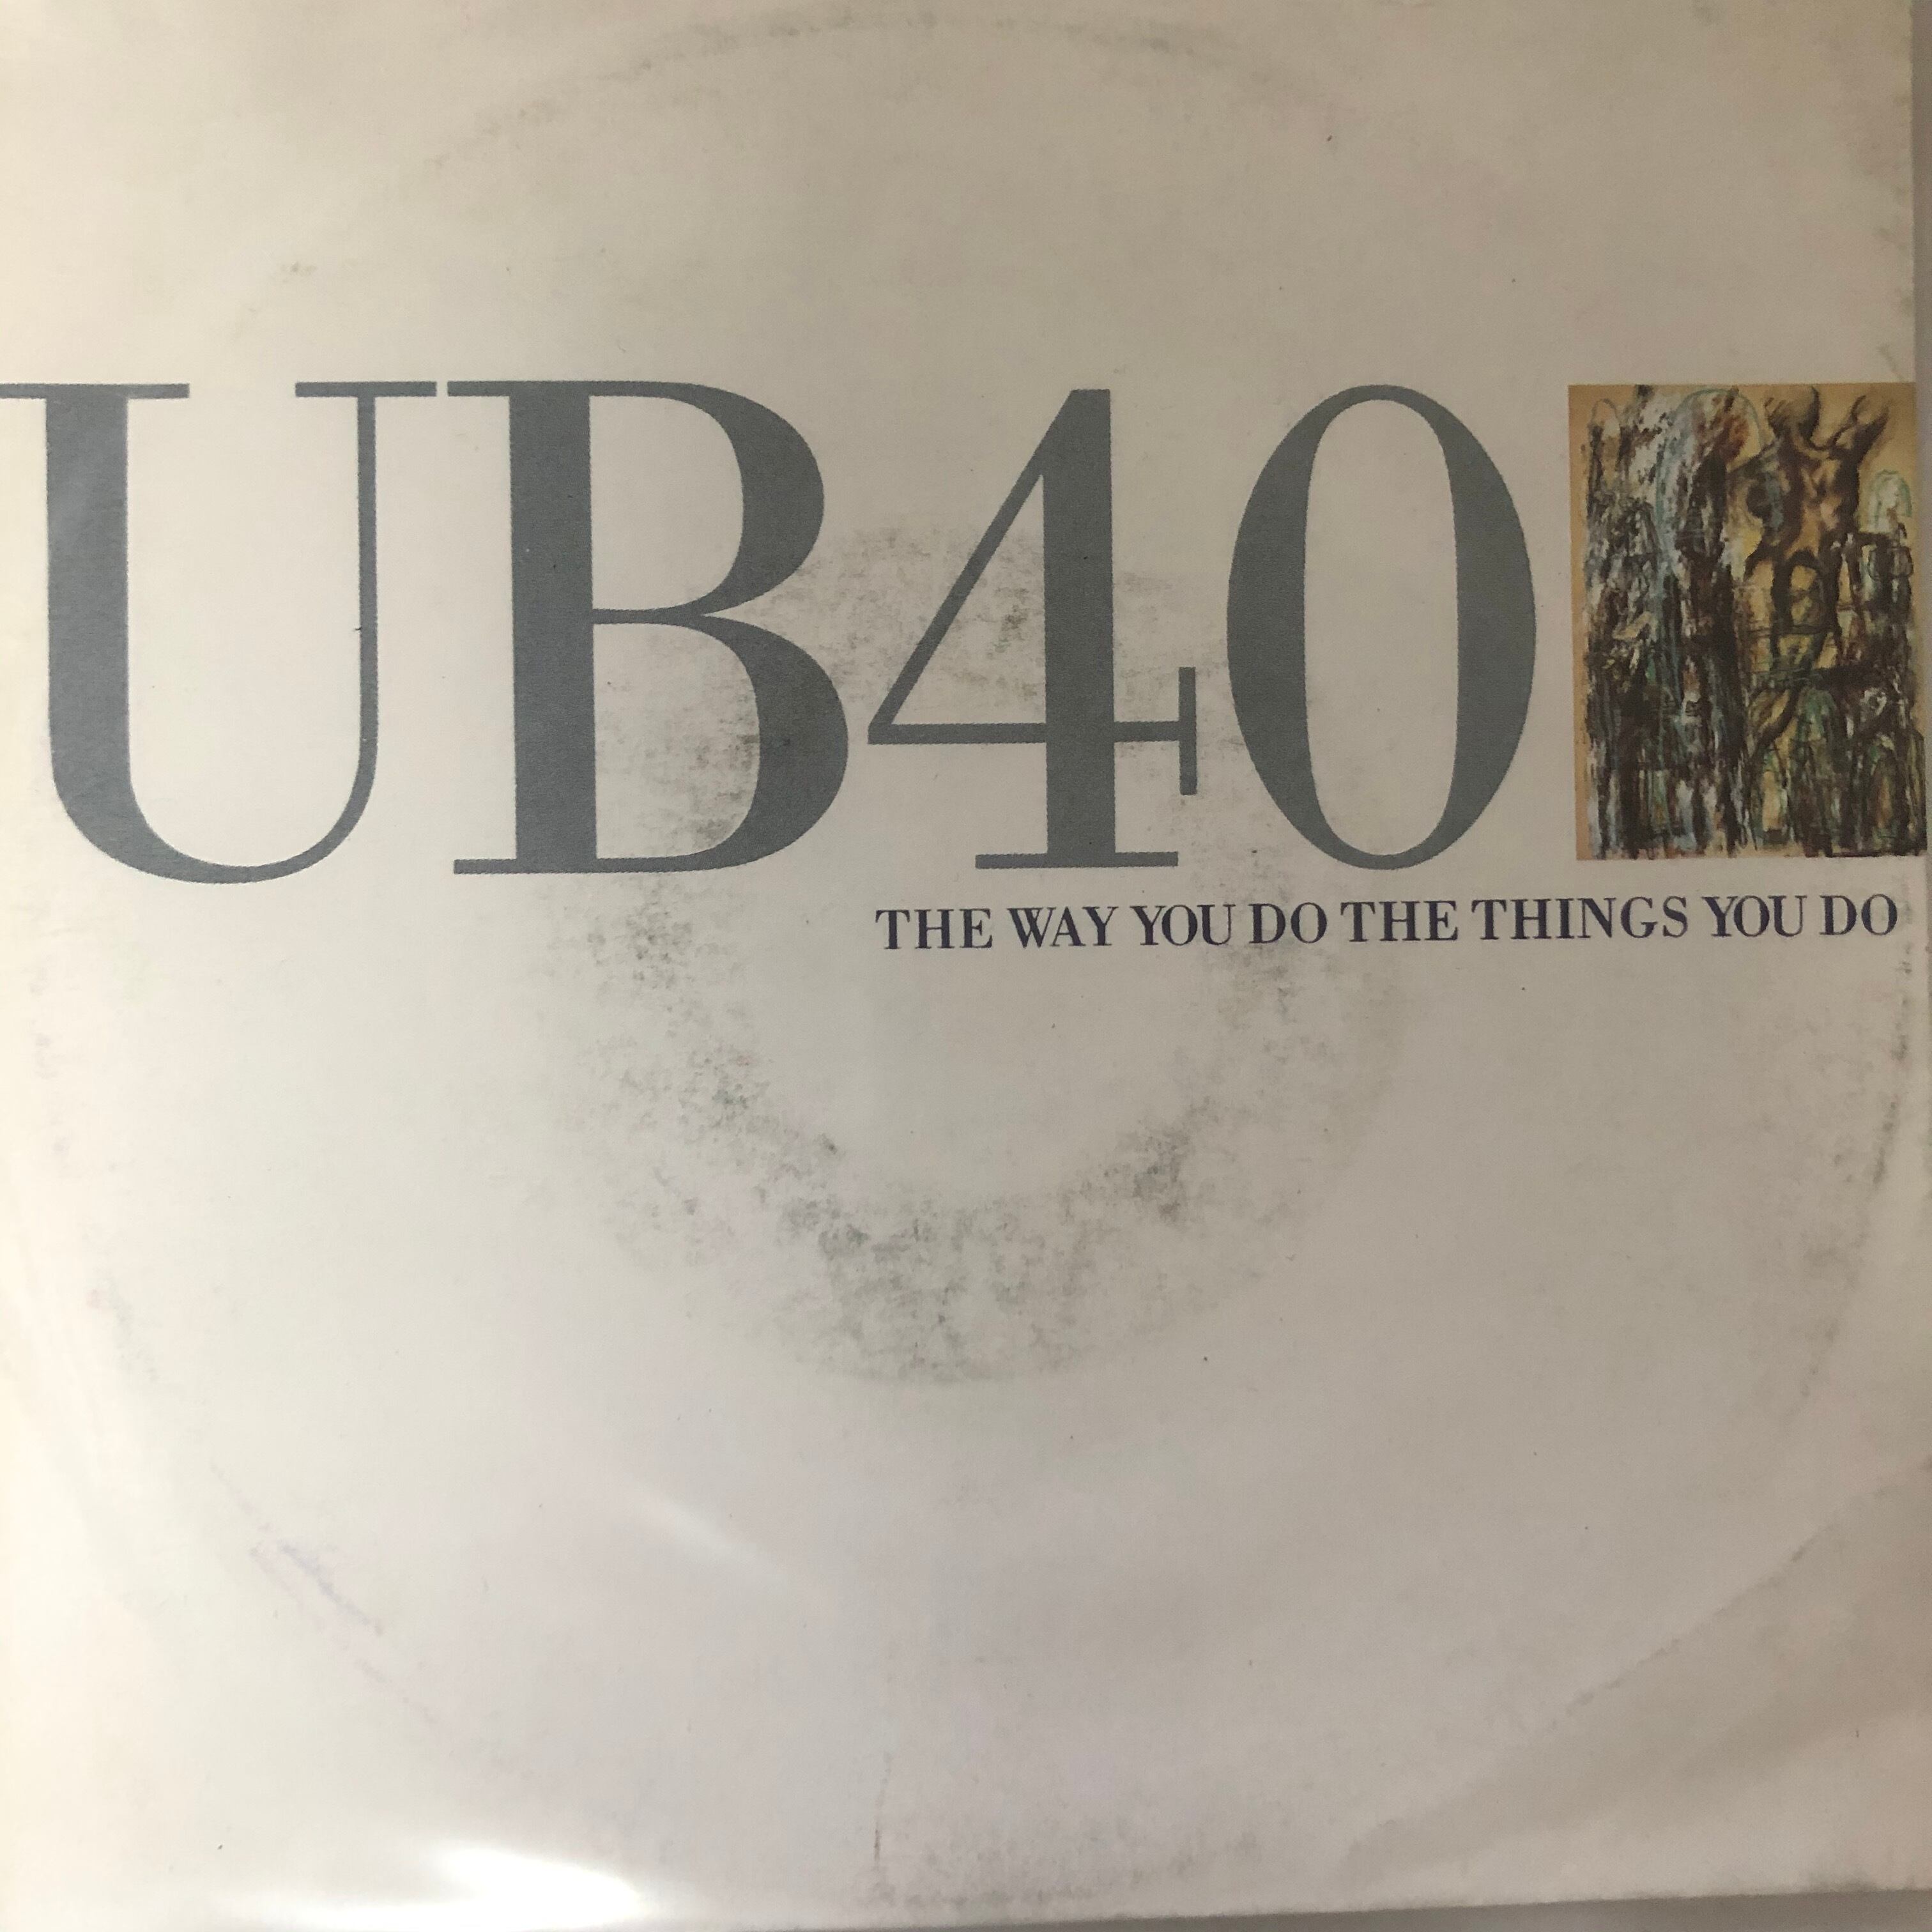 UB40 - The Way You Do The Things You Do【7-20543】